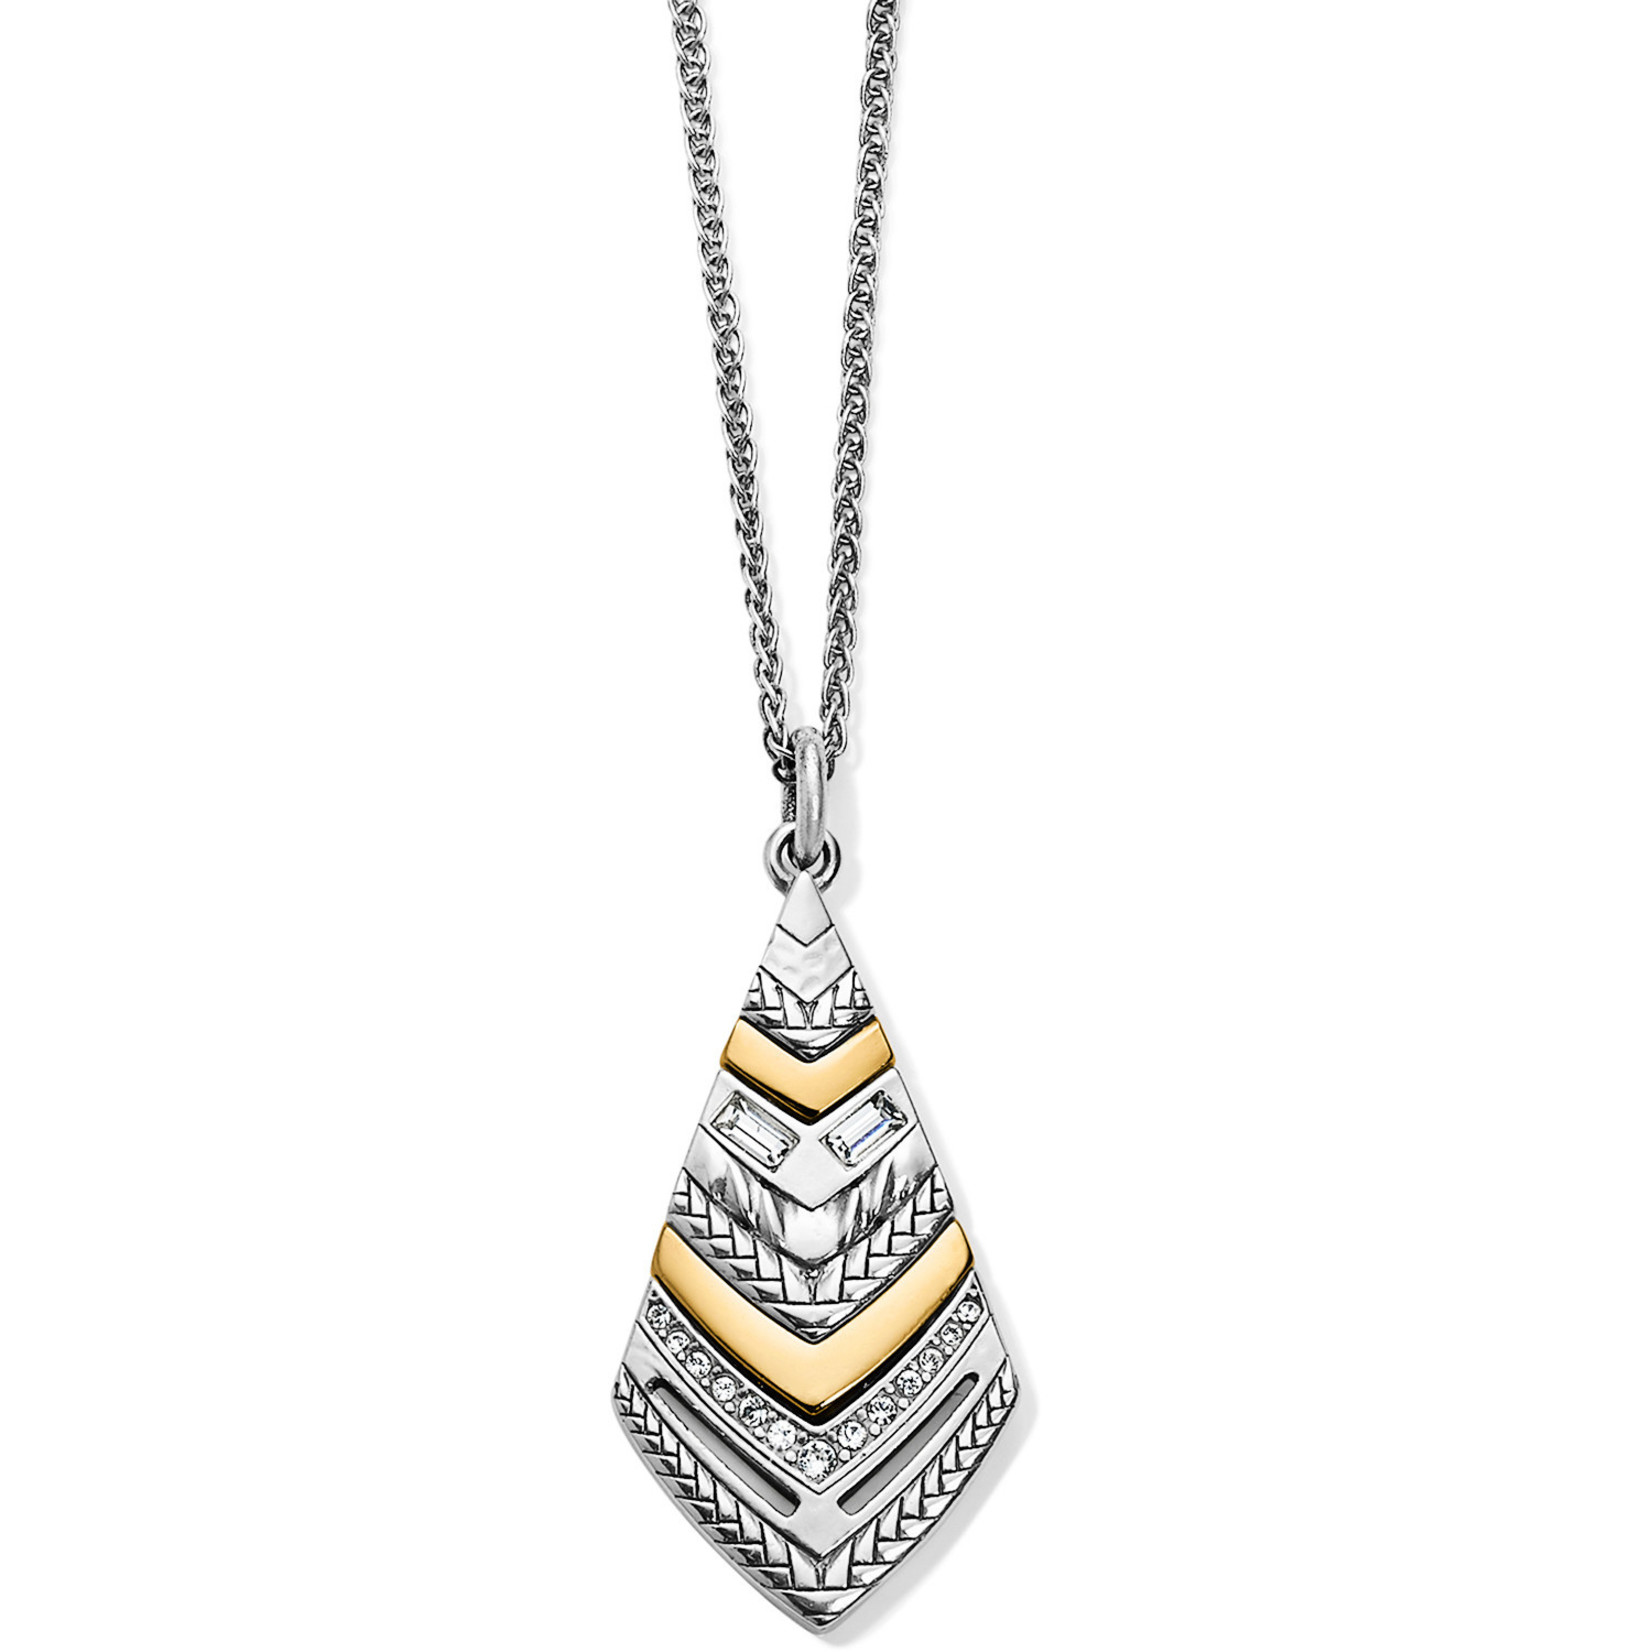 Brighton Tapestry Kite Short Necklace Silver-Gold